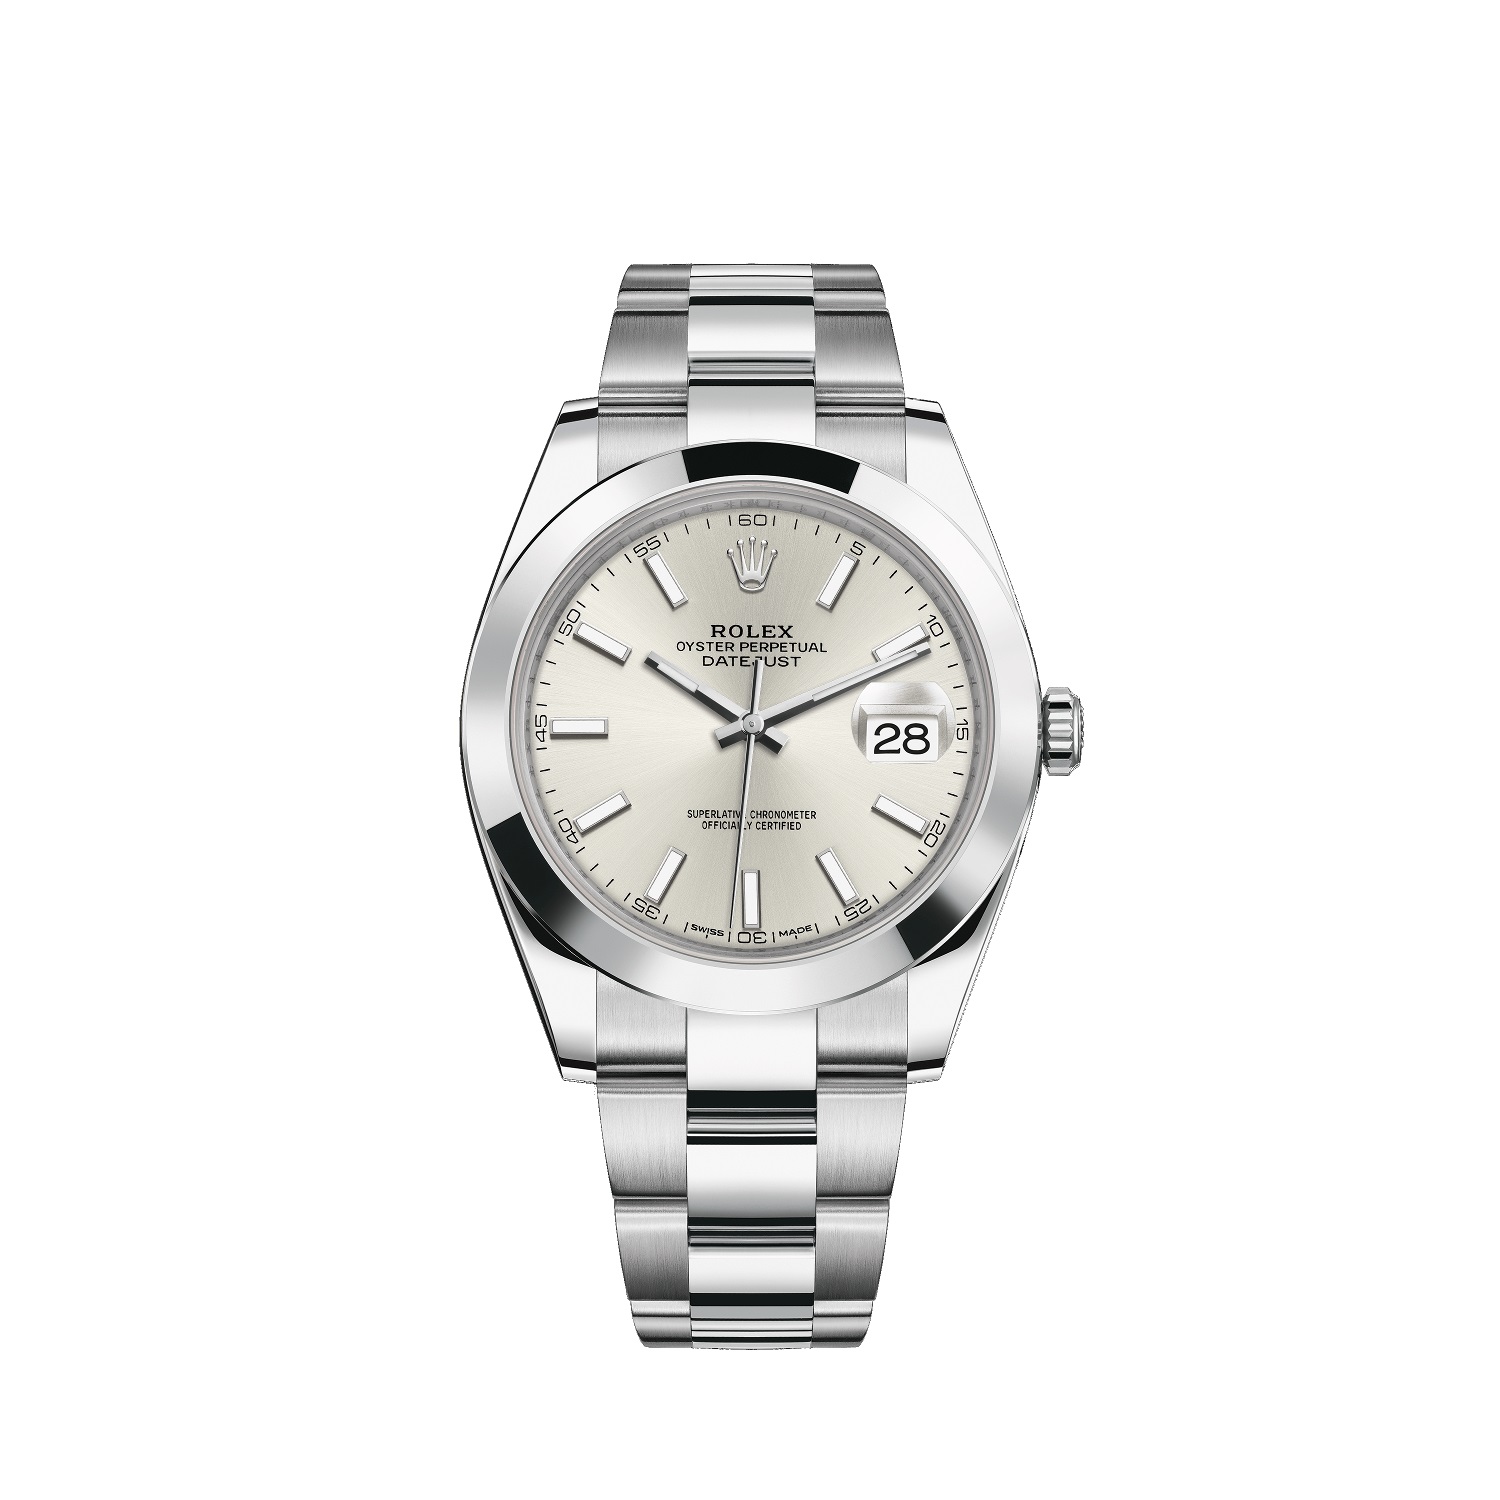 Datejust 41 126300 Stainless Steel Watch (Silver)